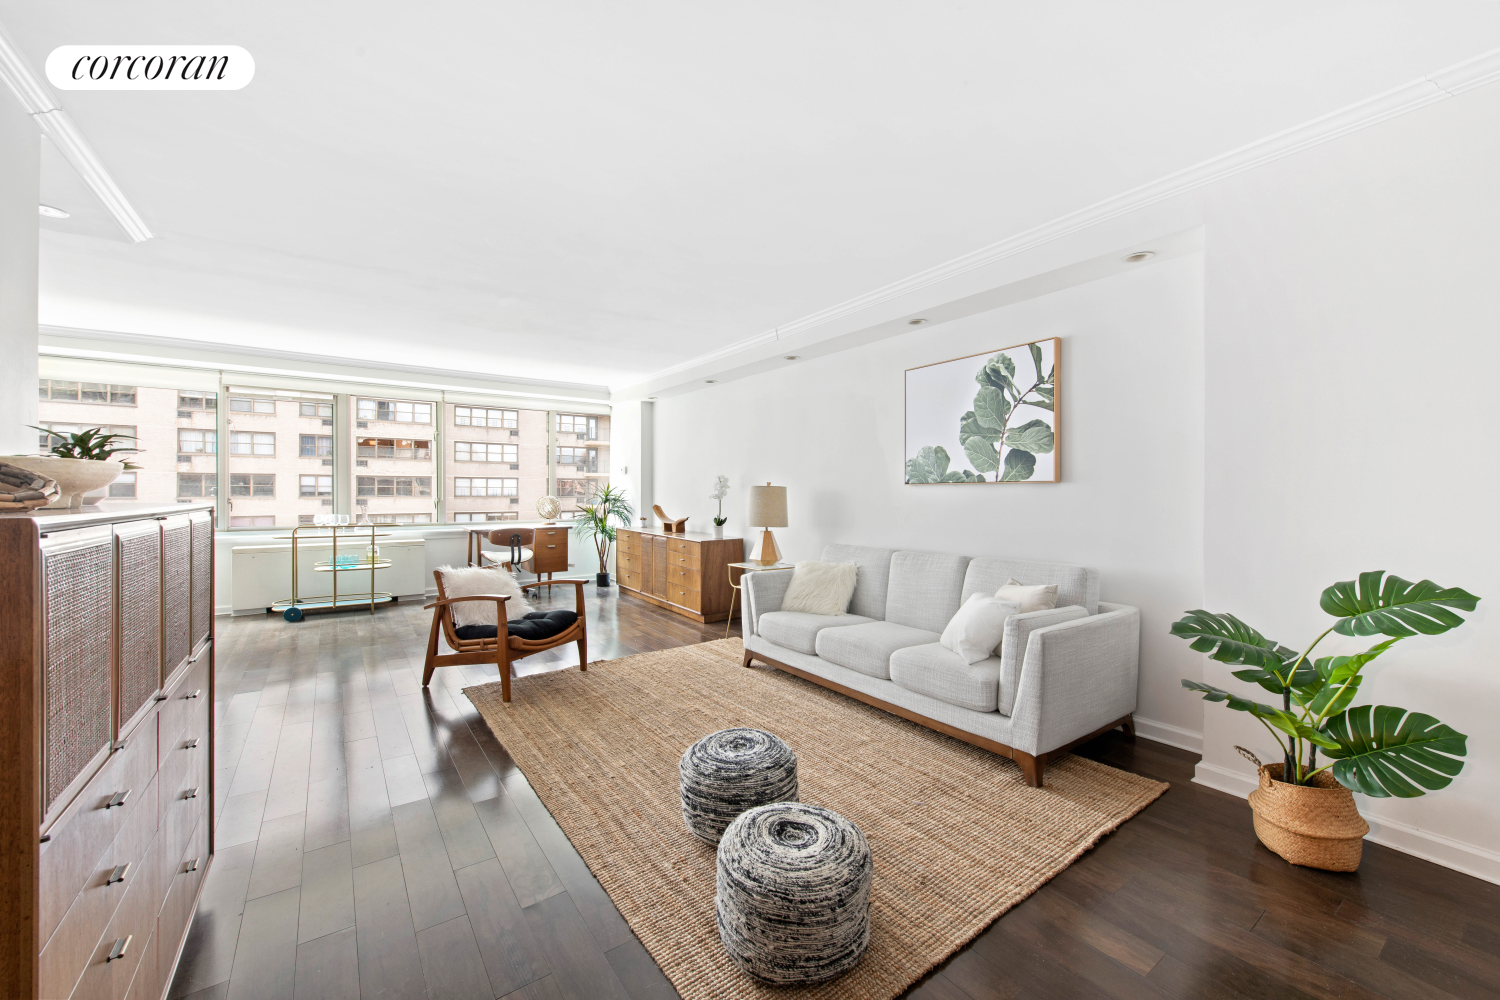 315 West 70th Street 15K1, Lincoln Sq, Upper West Side, NYC - 2 Bedrooms  
2 Bathrooms  
4 Rooms - 